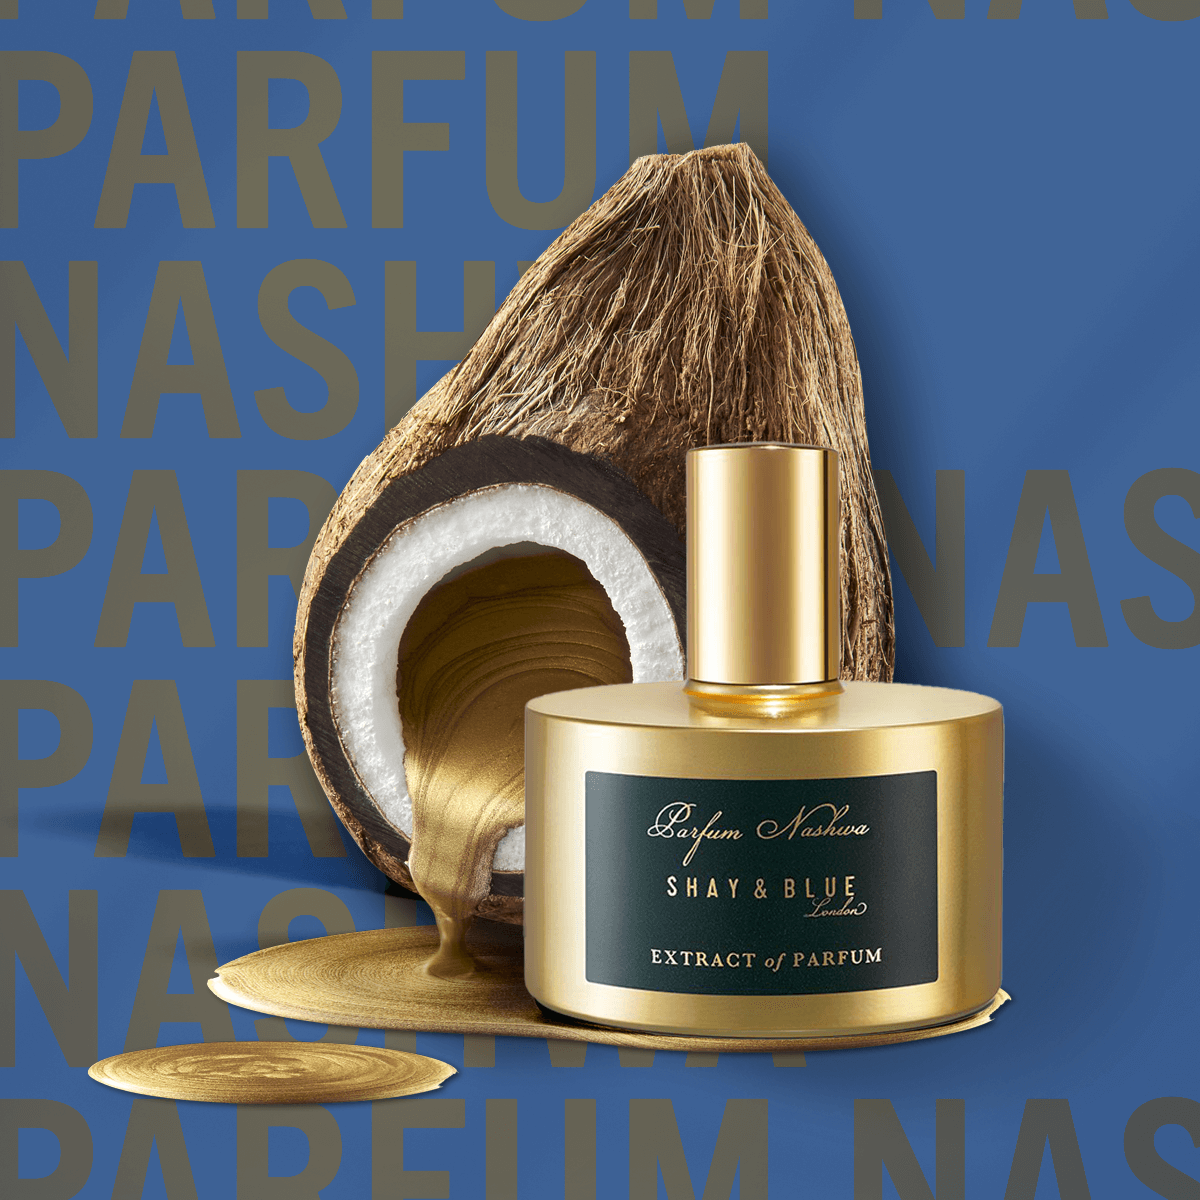 Parfum Nashwa Extract of Parfum 60ml | Rich notes of cacao noir and coconut melt over dark oud wood. | Clean All Gender Fragrance | Shay & Blue